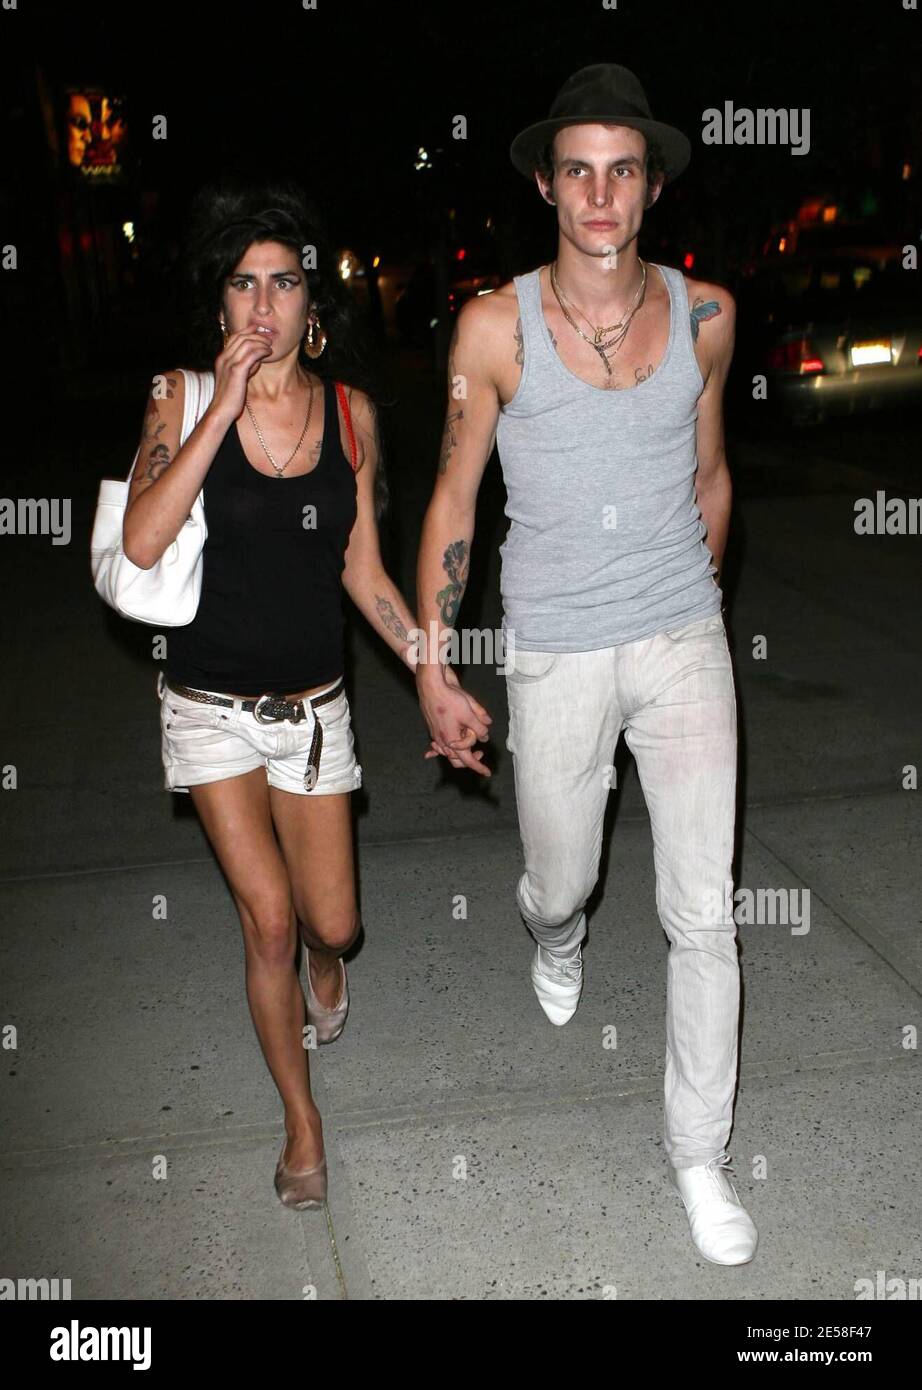 Amy Winehouse and husband Blake Fielder-Civil return from dinner while Amy gets something out of her teeth. The couple signed autographs near their hotel and Amy wore the same grubby white shorts she wore all last week in London. New York, NY. 8/1/07.   [[faa]] Stock Photo